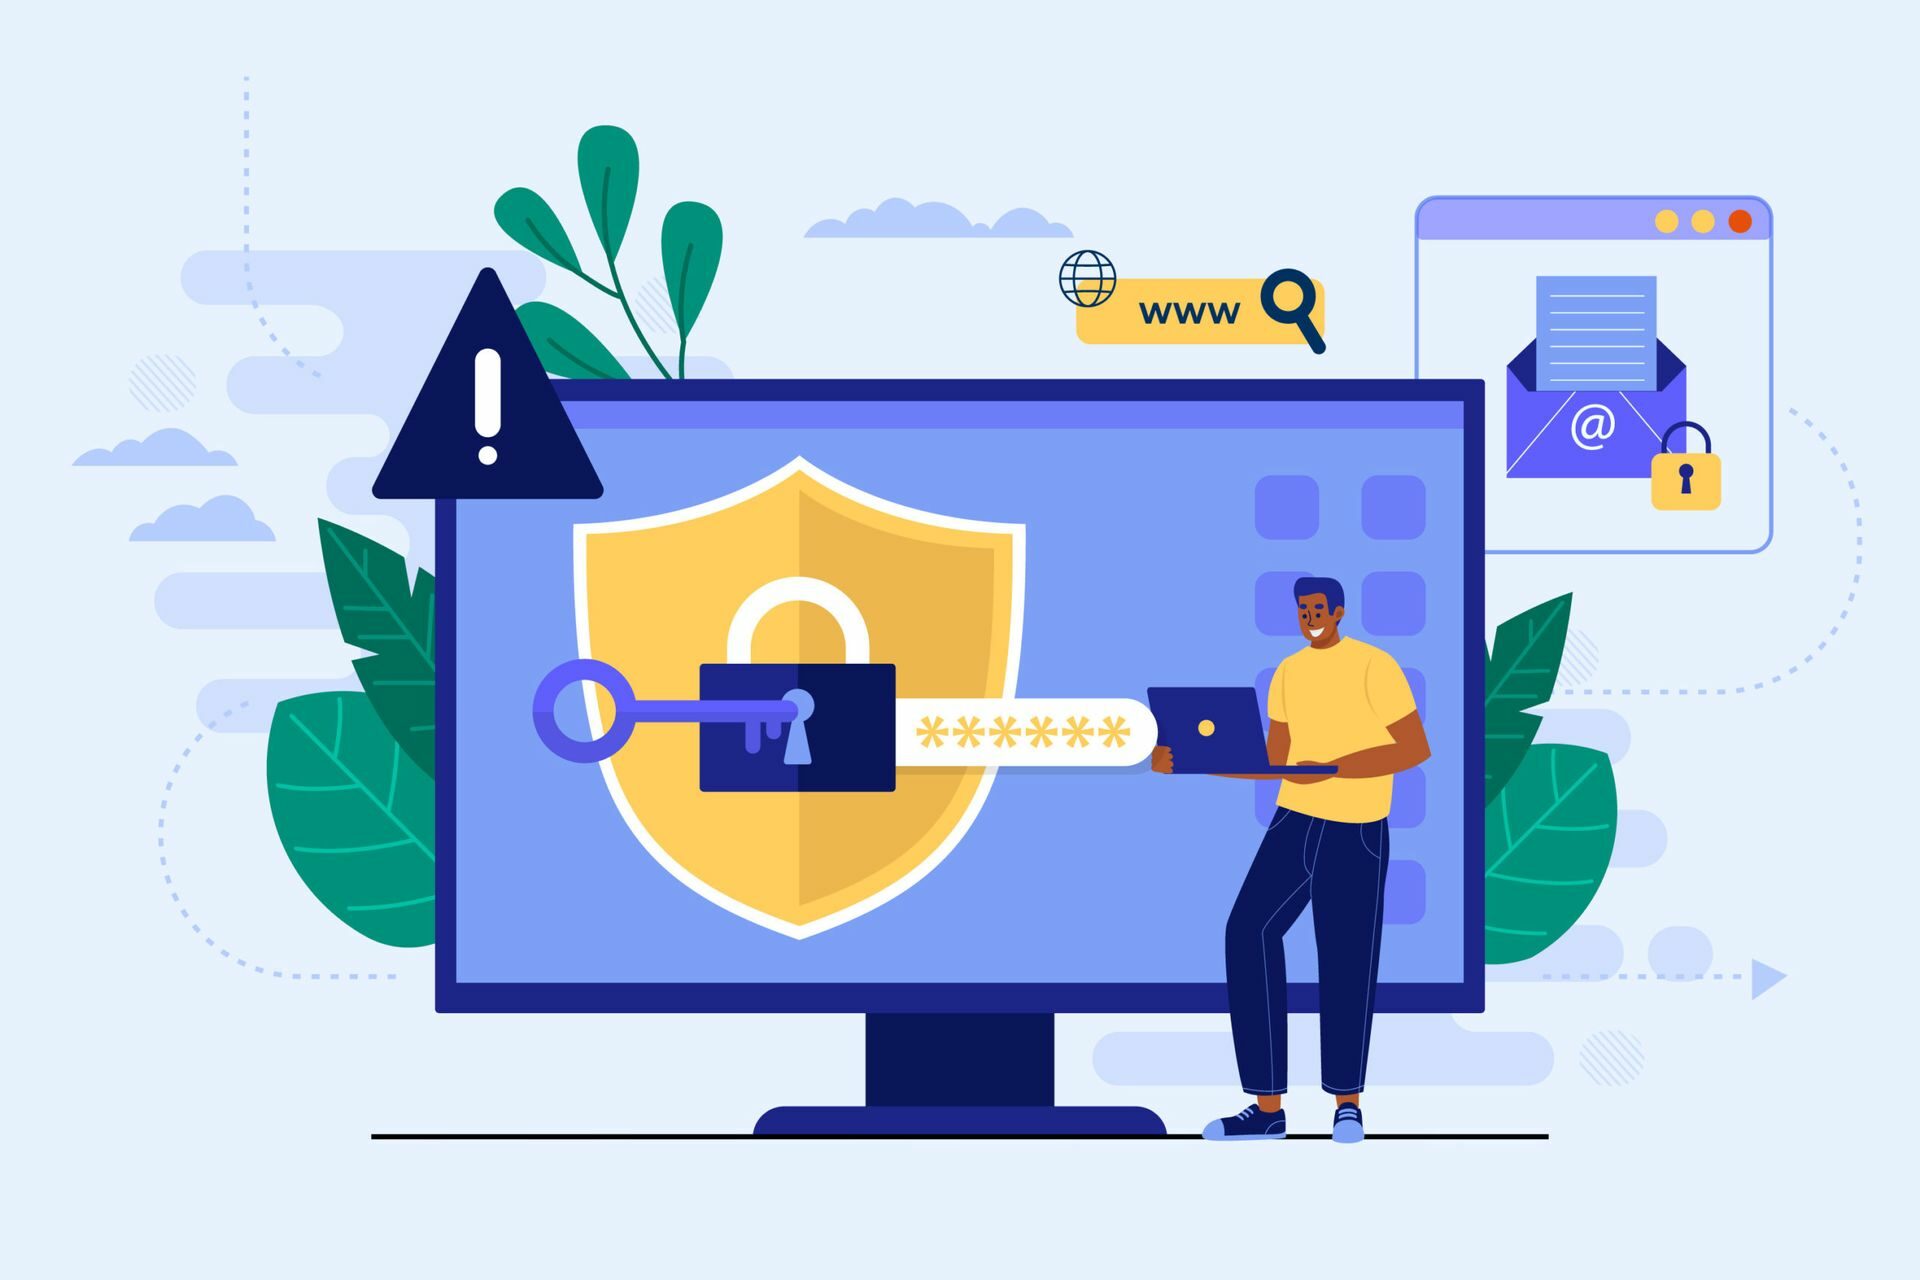 Web Security- Best Practices for Keeping Your Site Safe